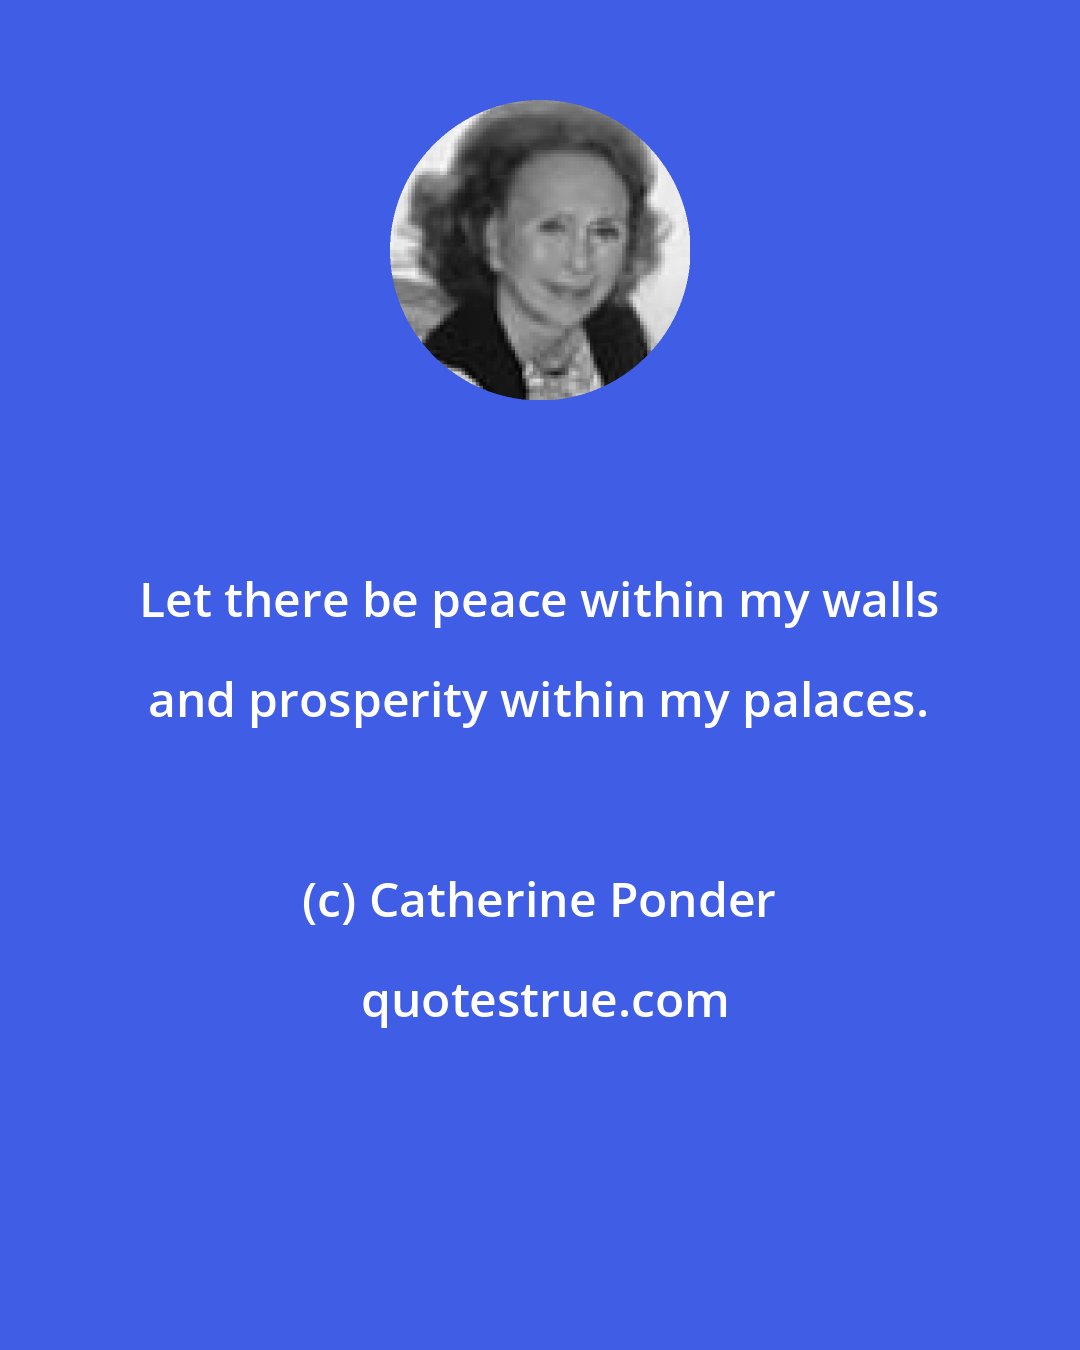 Catherine Ponder: Let there be peace within my walls and prosperity within my palaces.